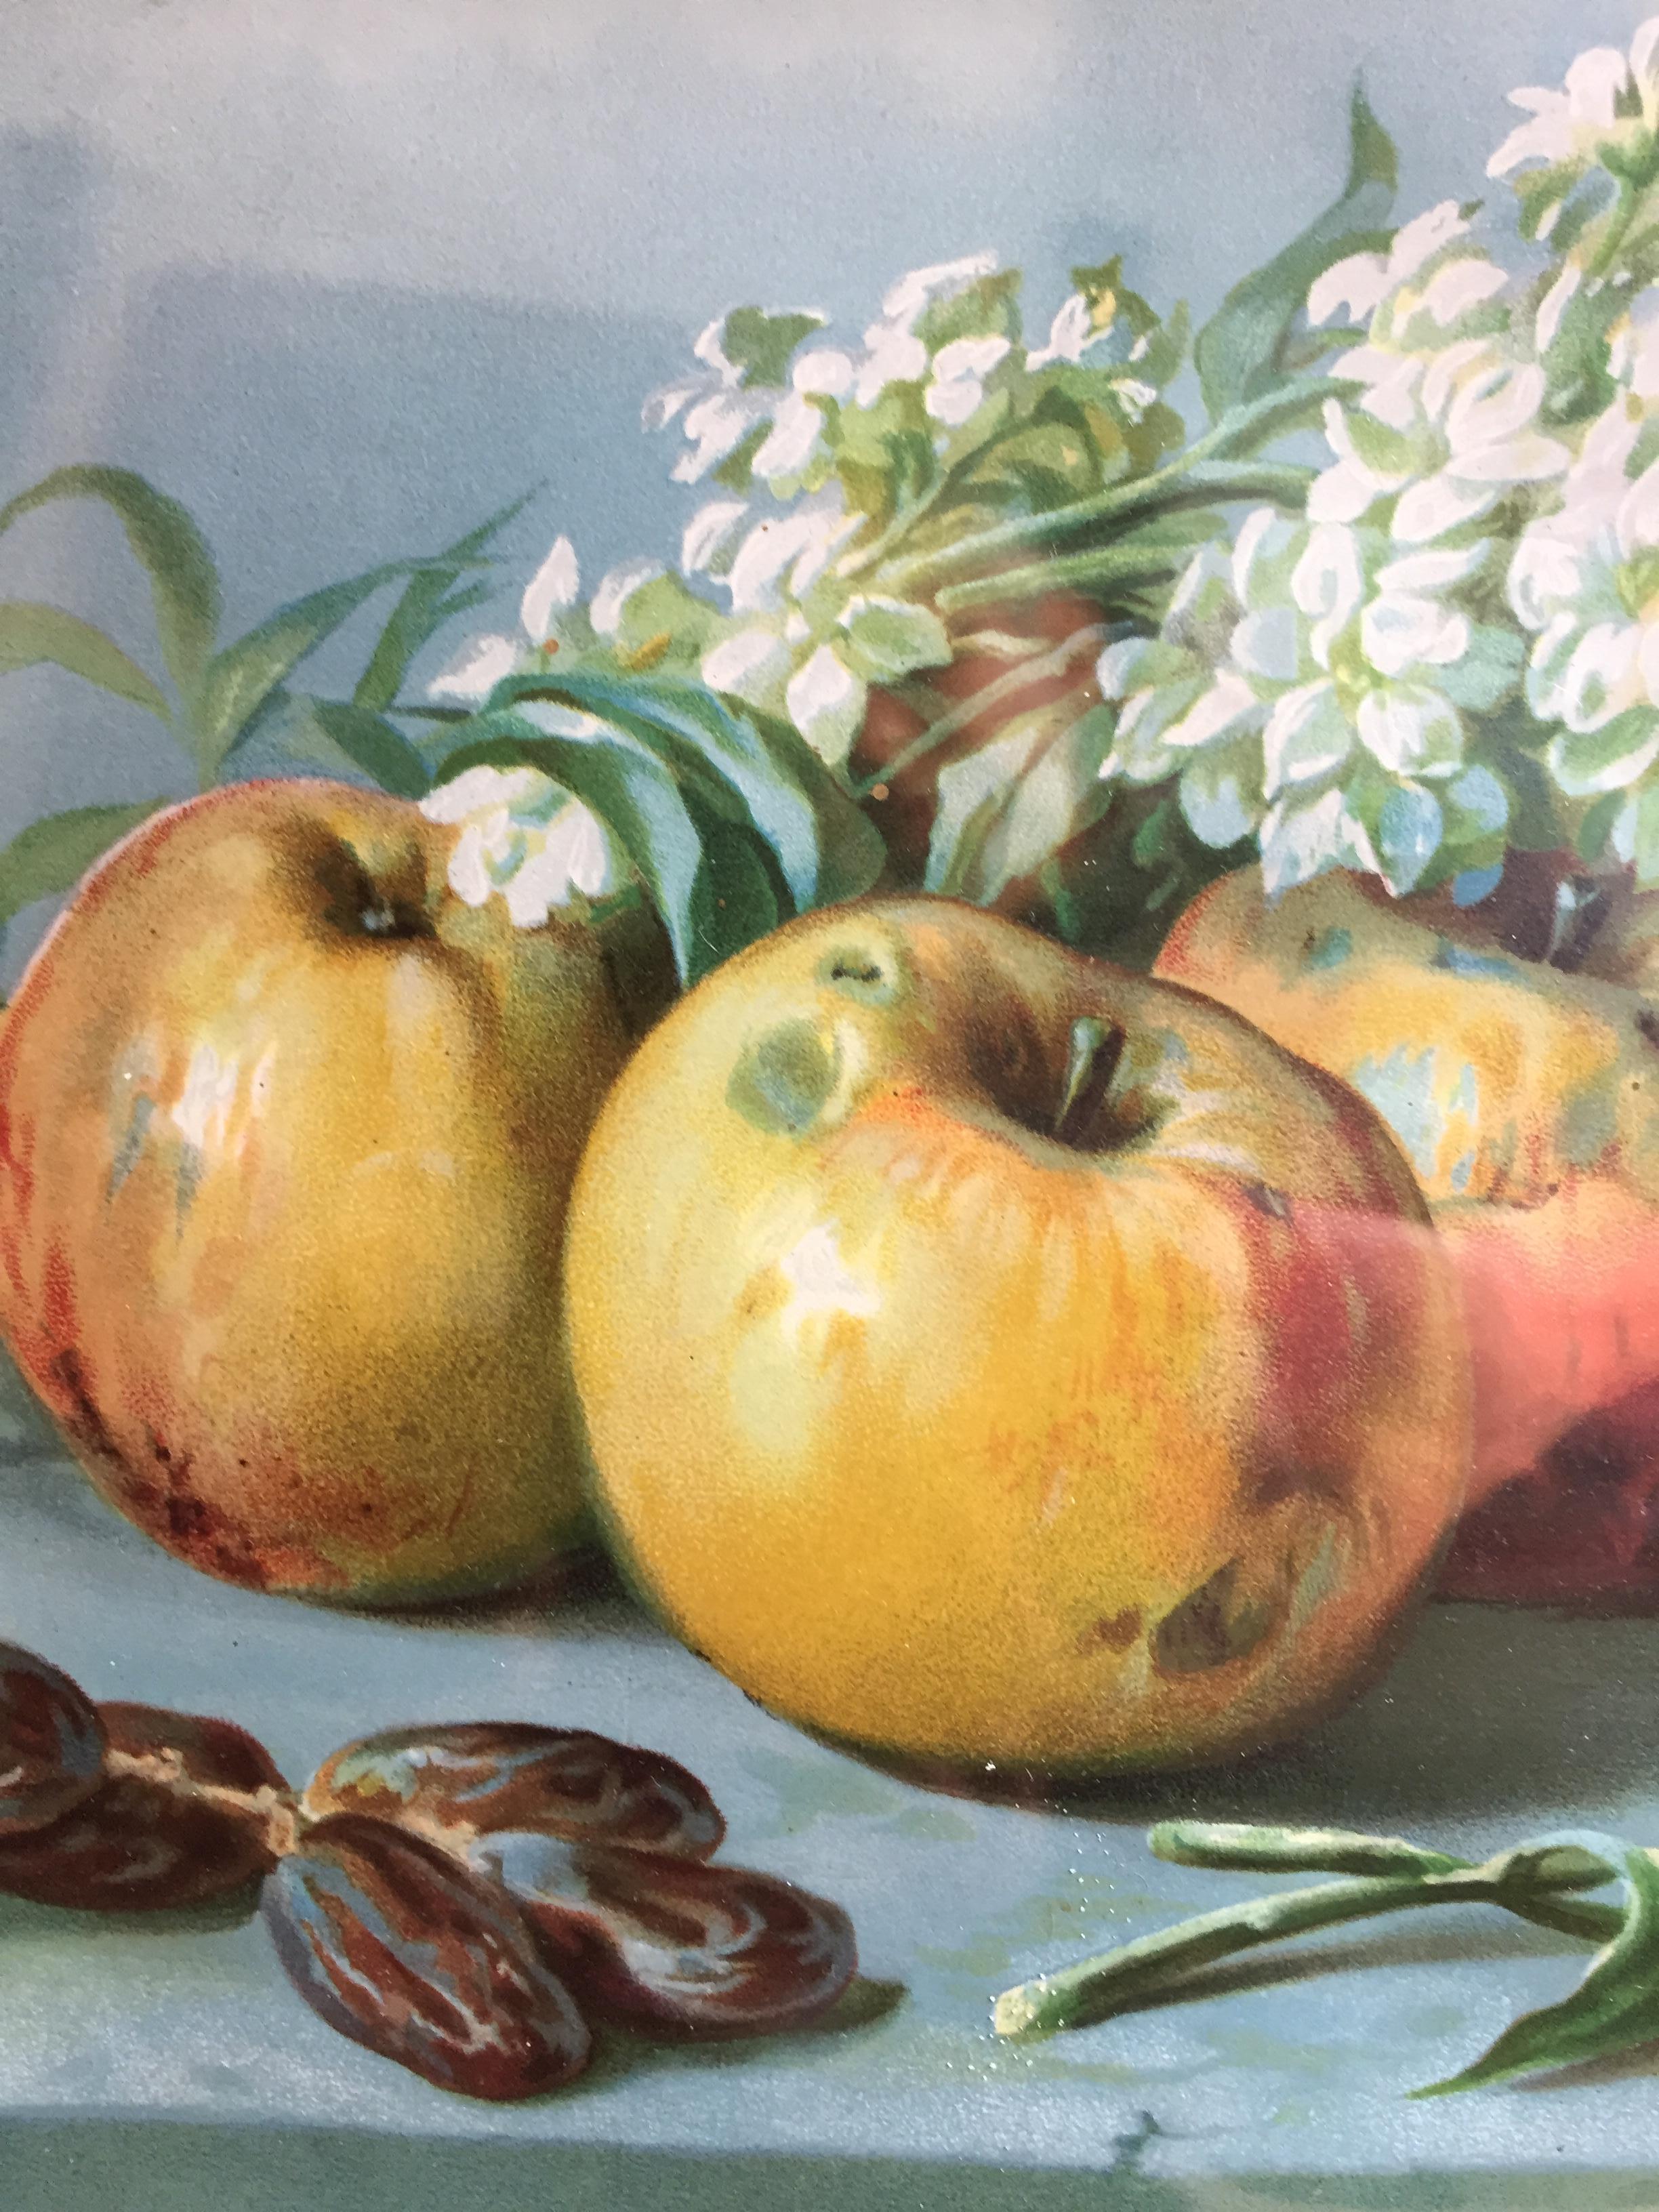 Early 20th century Italian lithograph hand-colored by Giuseppe Falchetti depicting still life of fruit and flowers, horizontally framed, apples, pears and white flowers are arranged on a table with a pale blue background. Set in gold varnished